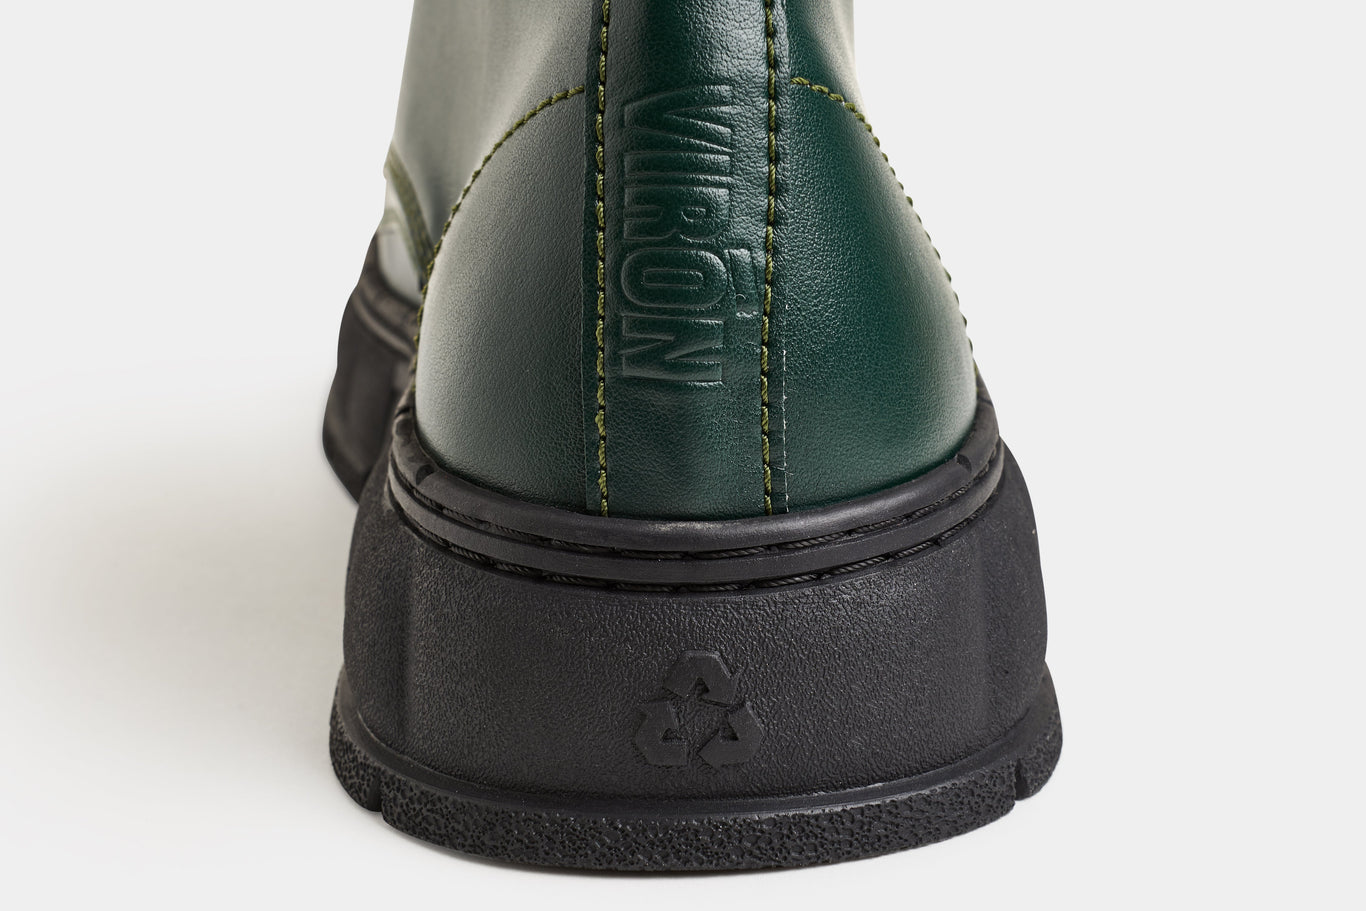 Virón 1992 Forest Apple Boots